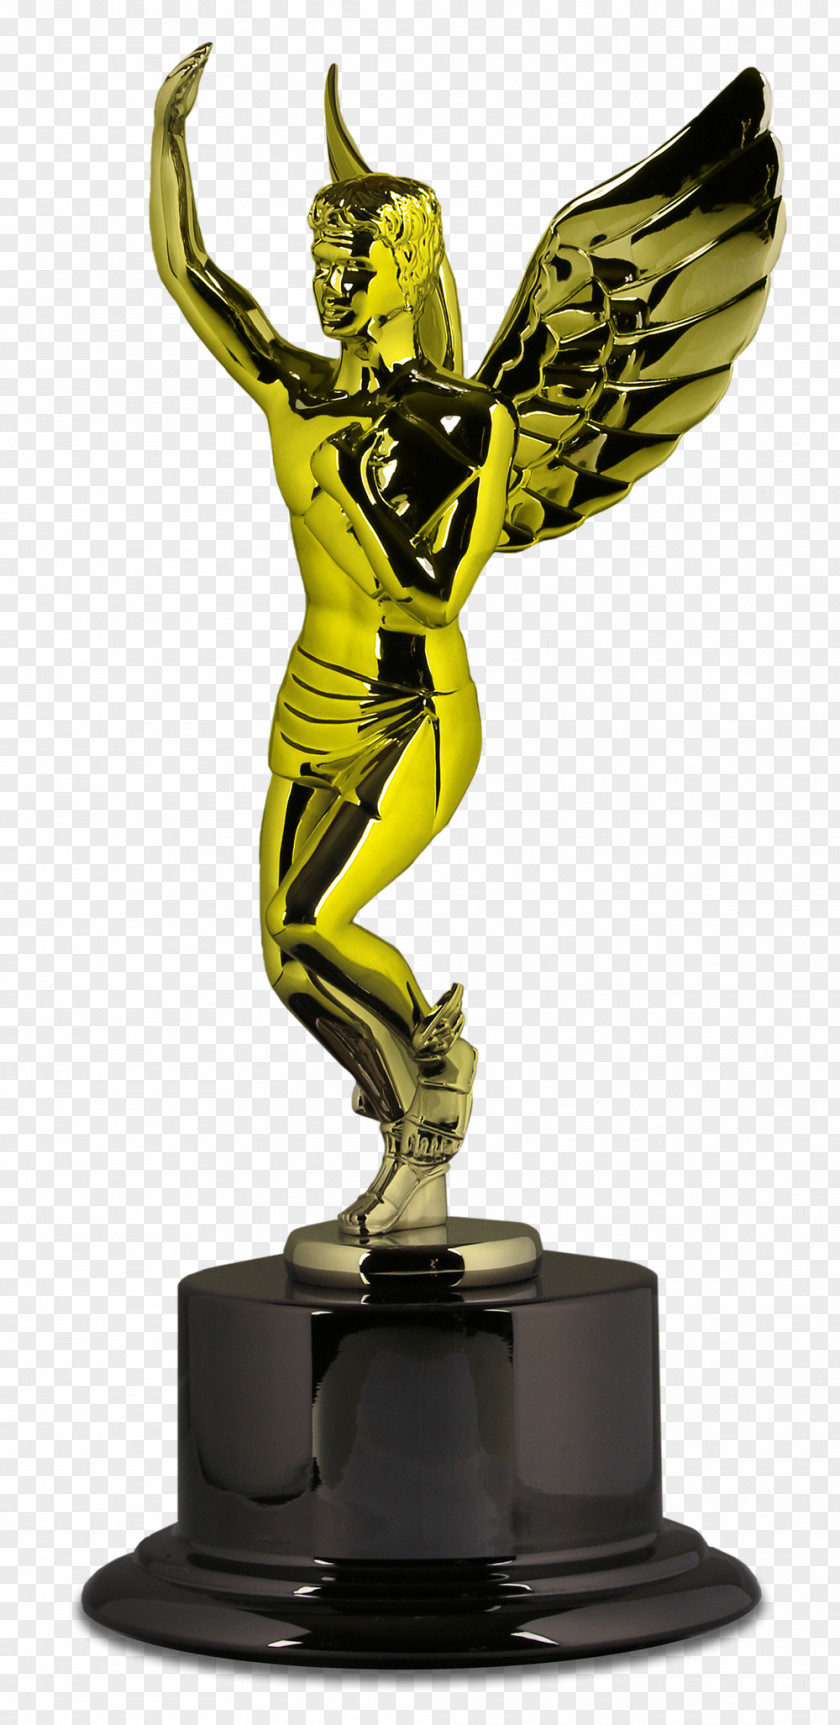 Award Hermes Creative Awards Competition Advertising Creativity PNG